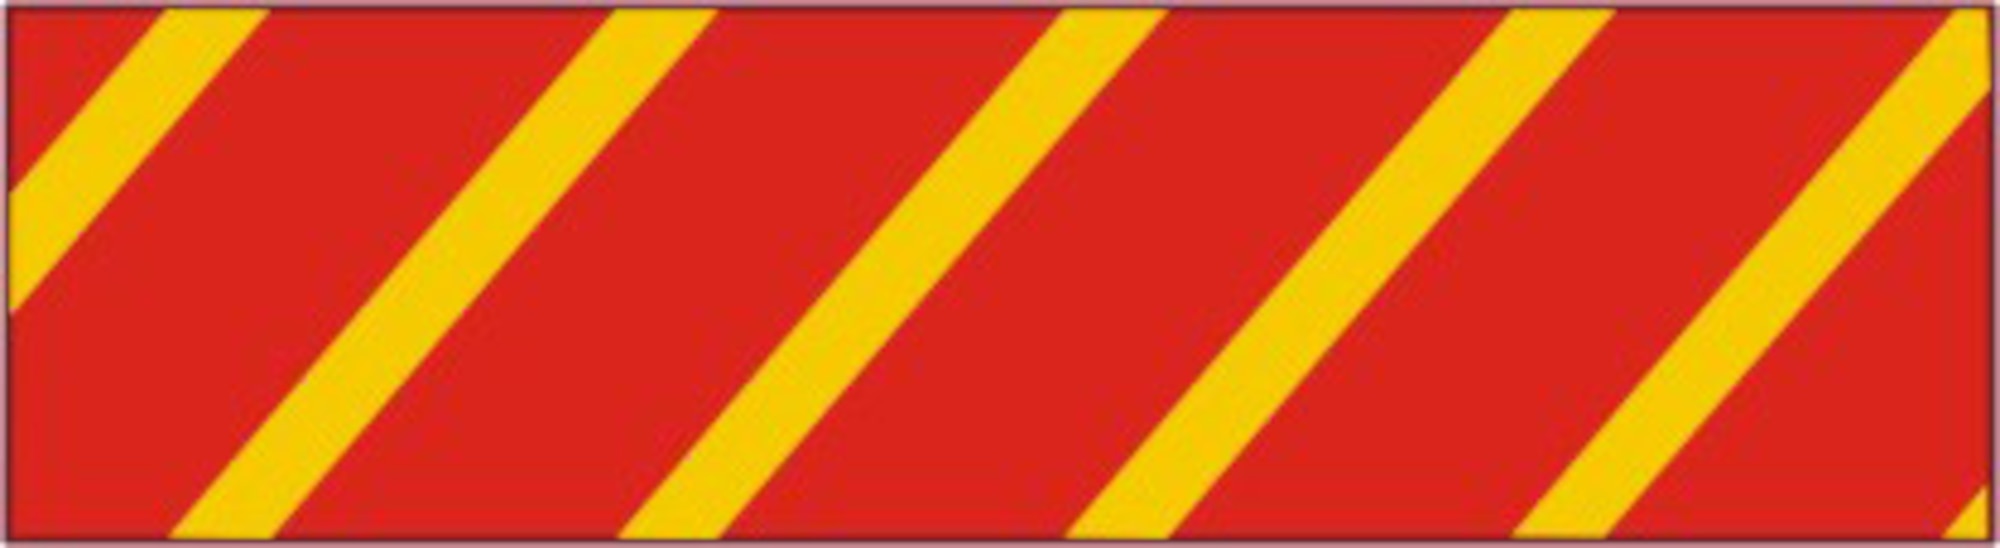 Air Force combat action medal ribbon. (U.S. Air Force graphic)